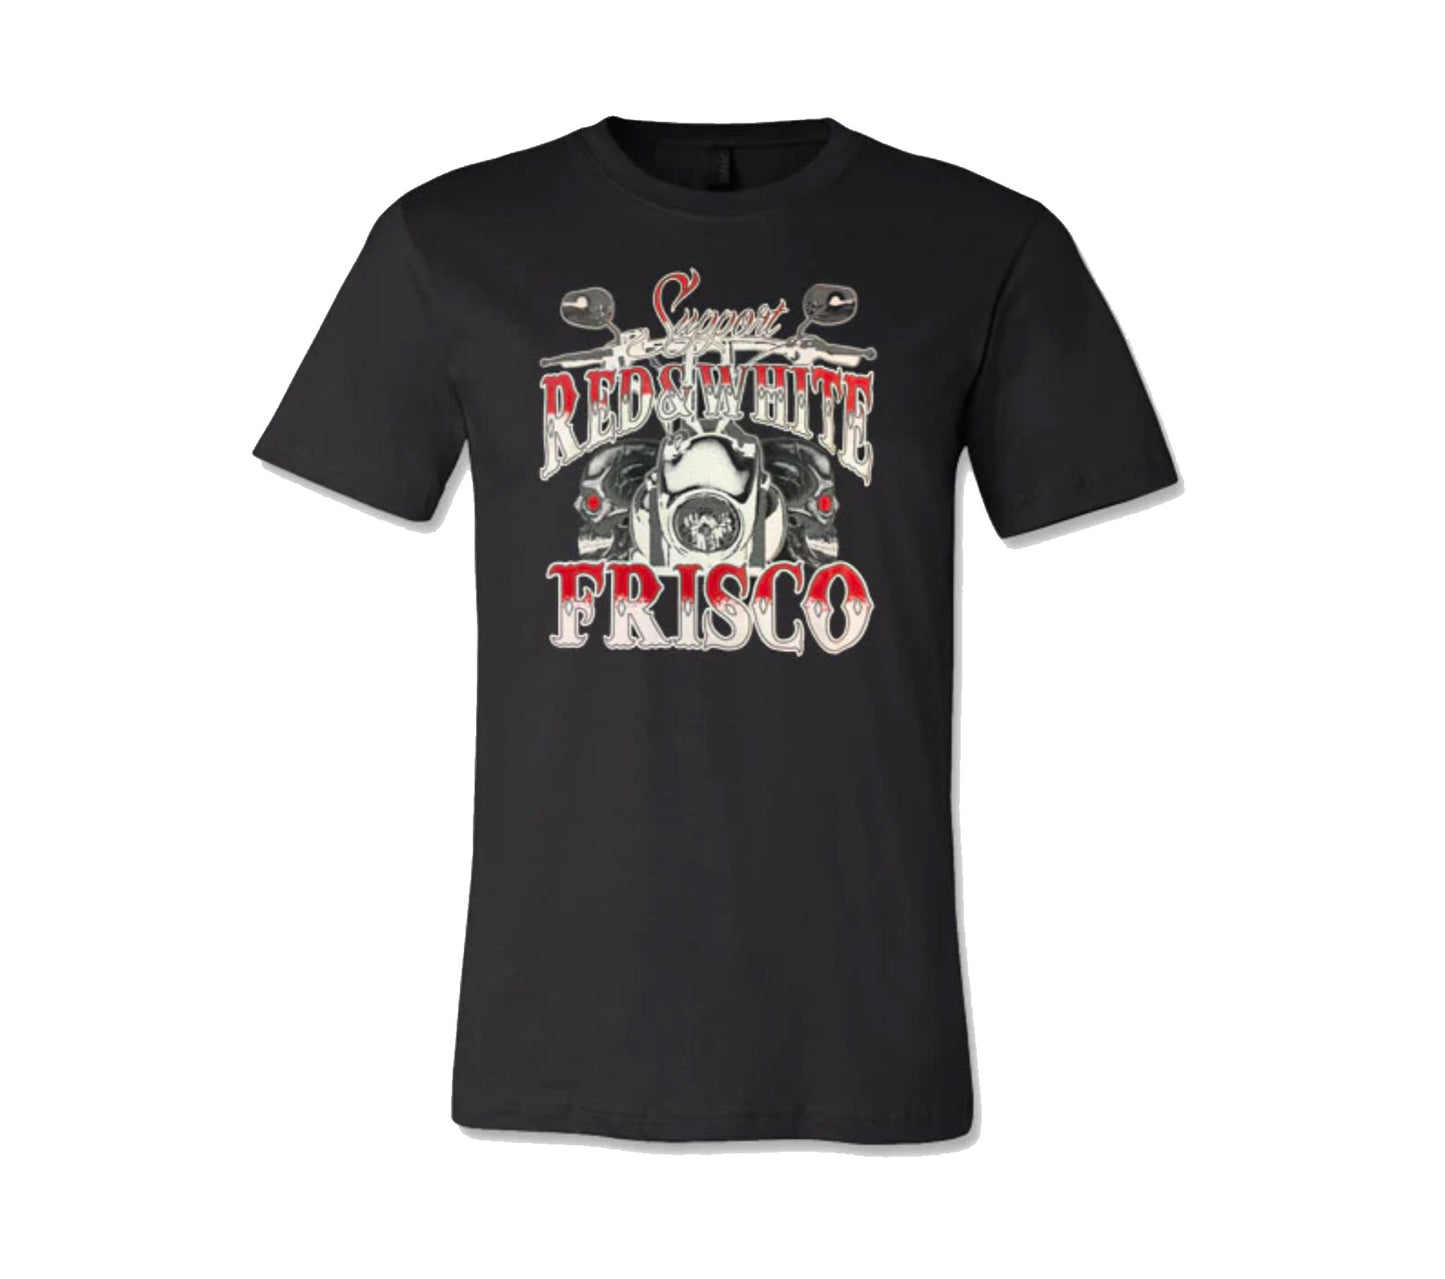 Frisco Support Red & White T-Bars T-Shirt